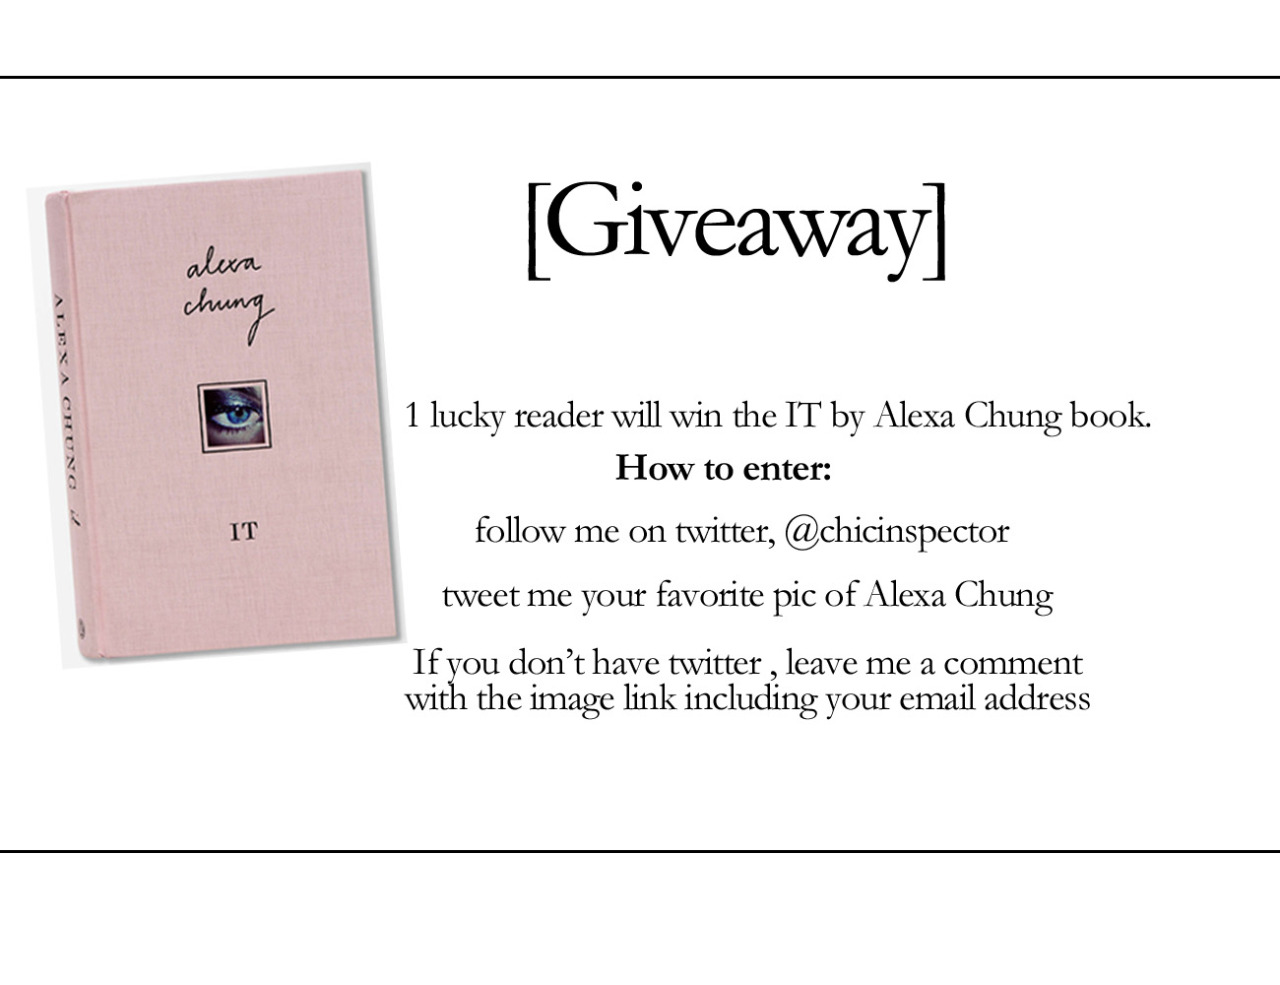 Alexa Chung IT book Giveaway 1 lucky reader will win the IT by Alexa Chung book.  How to enter:  follow me on twitter, @chicinspector tweet me your favorite pic of Alexa Chung If you don’t have twitter, leave me a comment with the image link including your email address